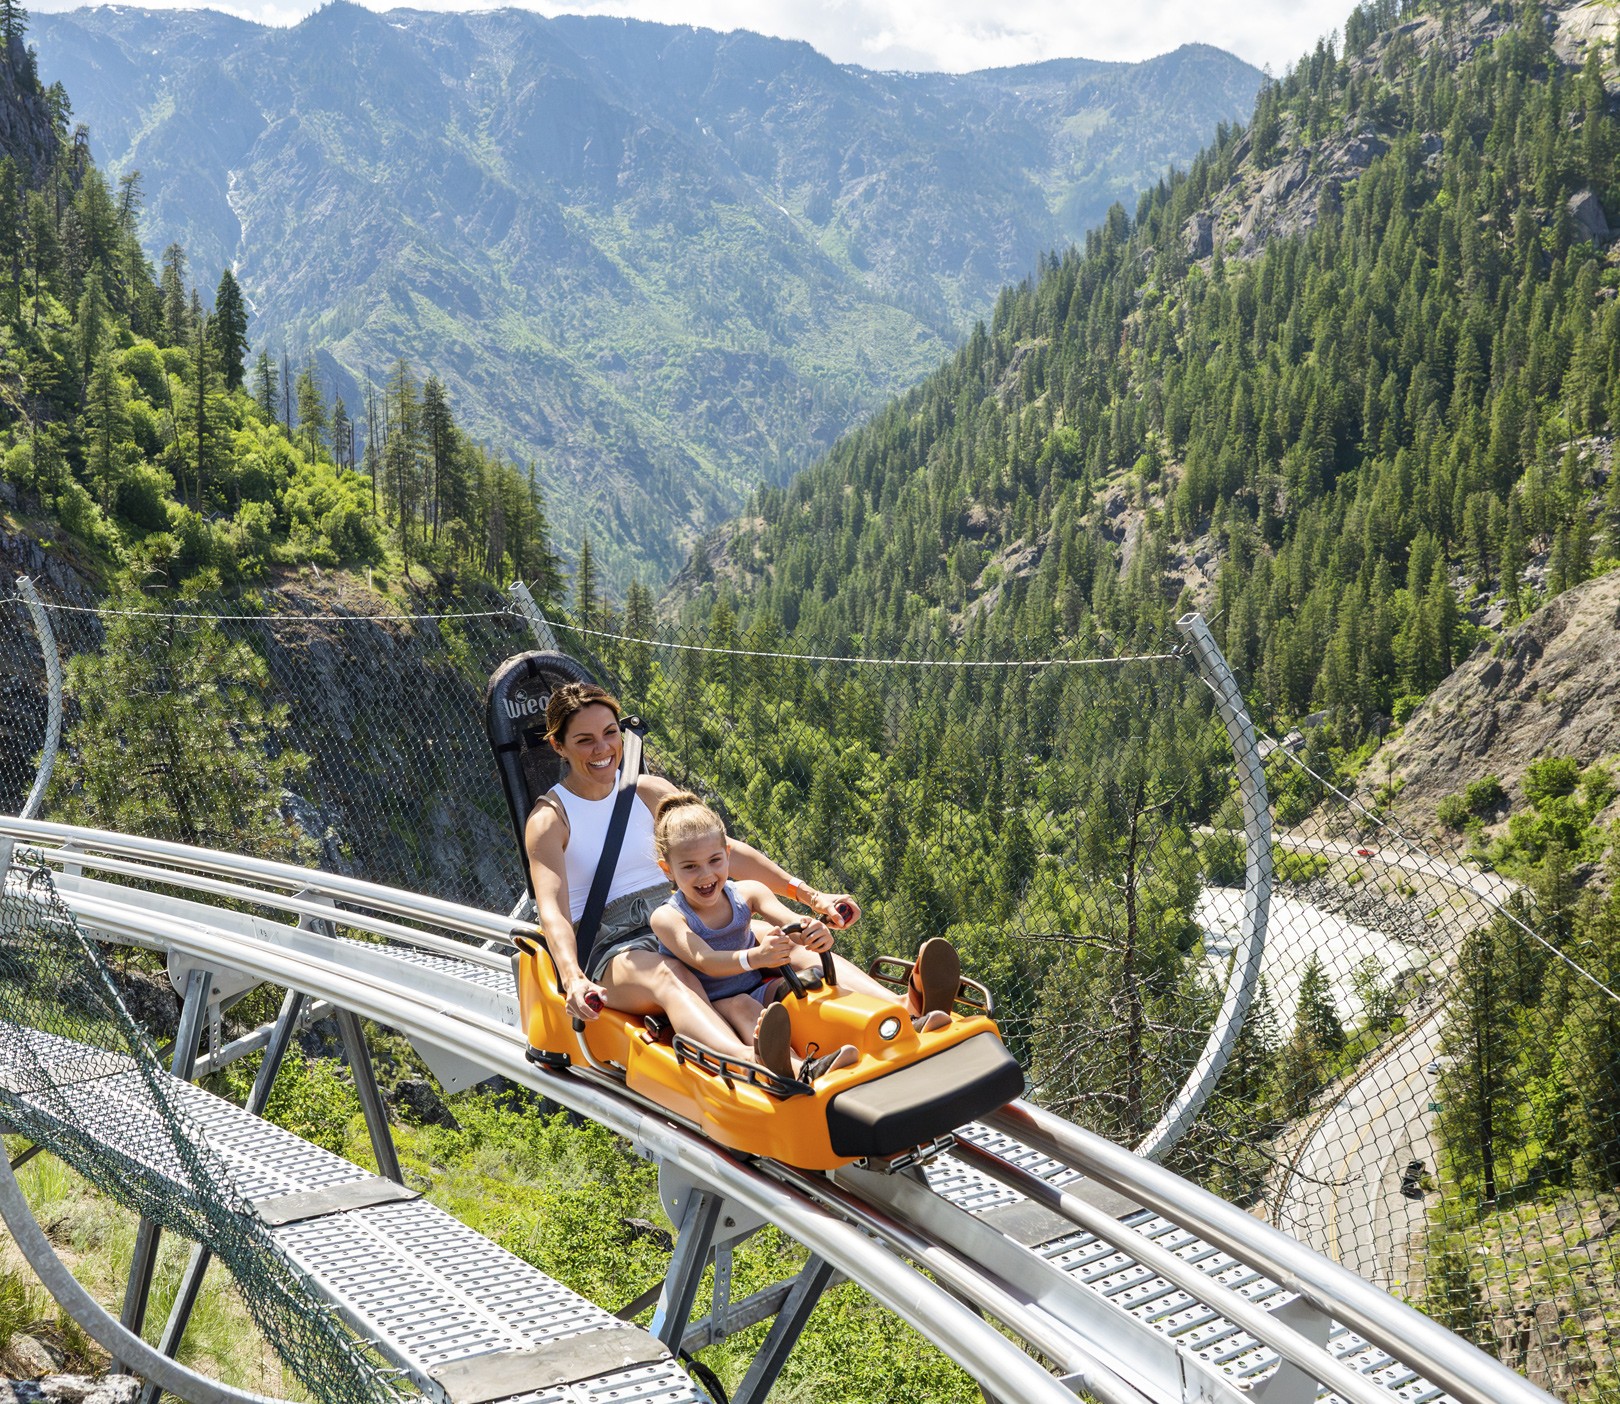 12 theme parks and water parks in the Pacific Northwest - Oregon,  Washington and Idaho